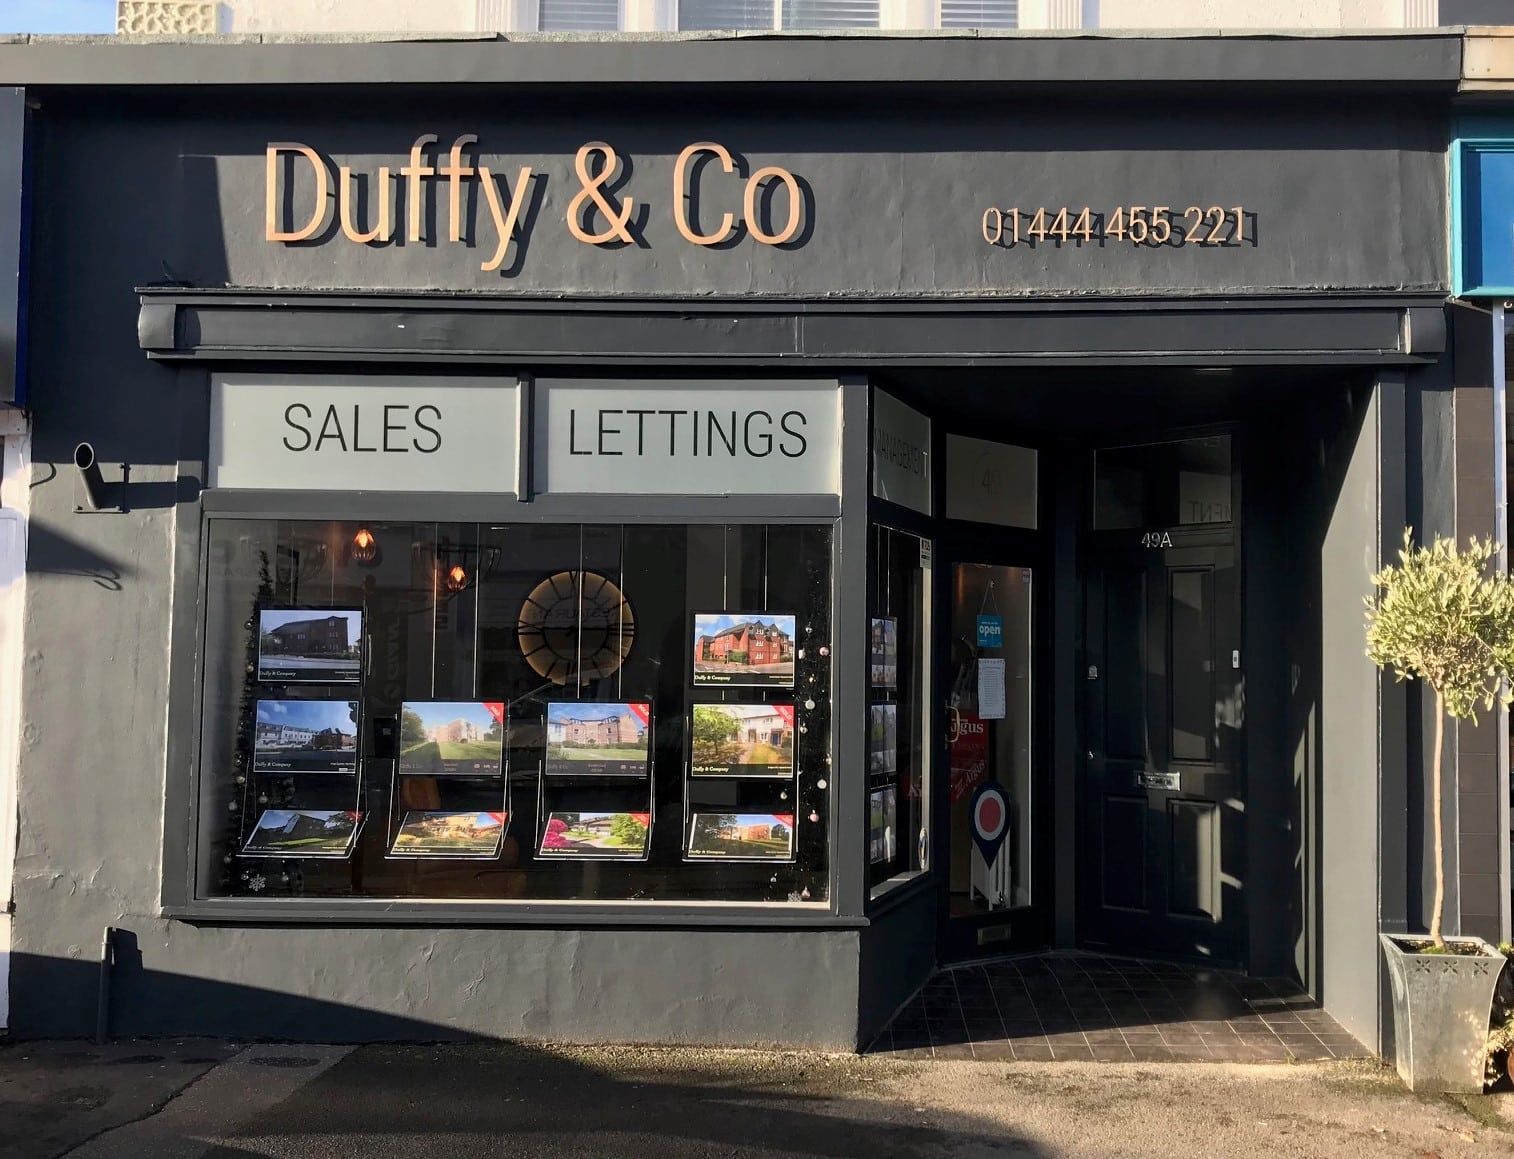 About Duffy & Co